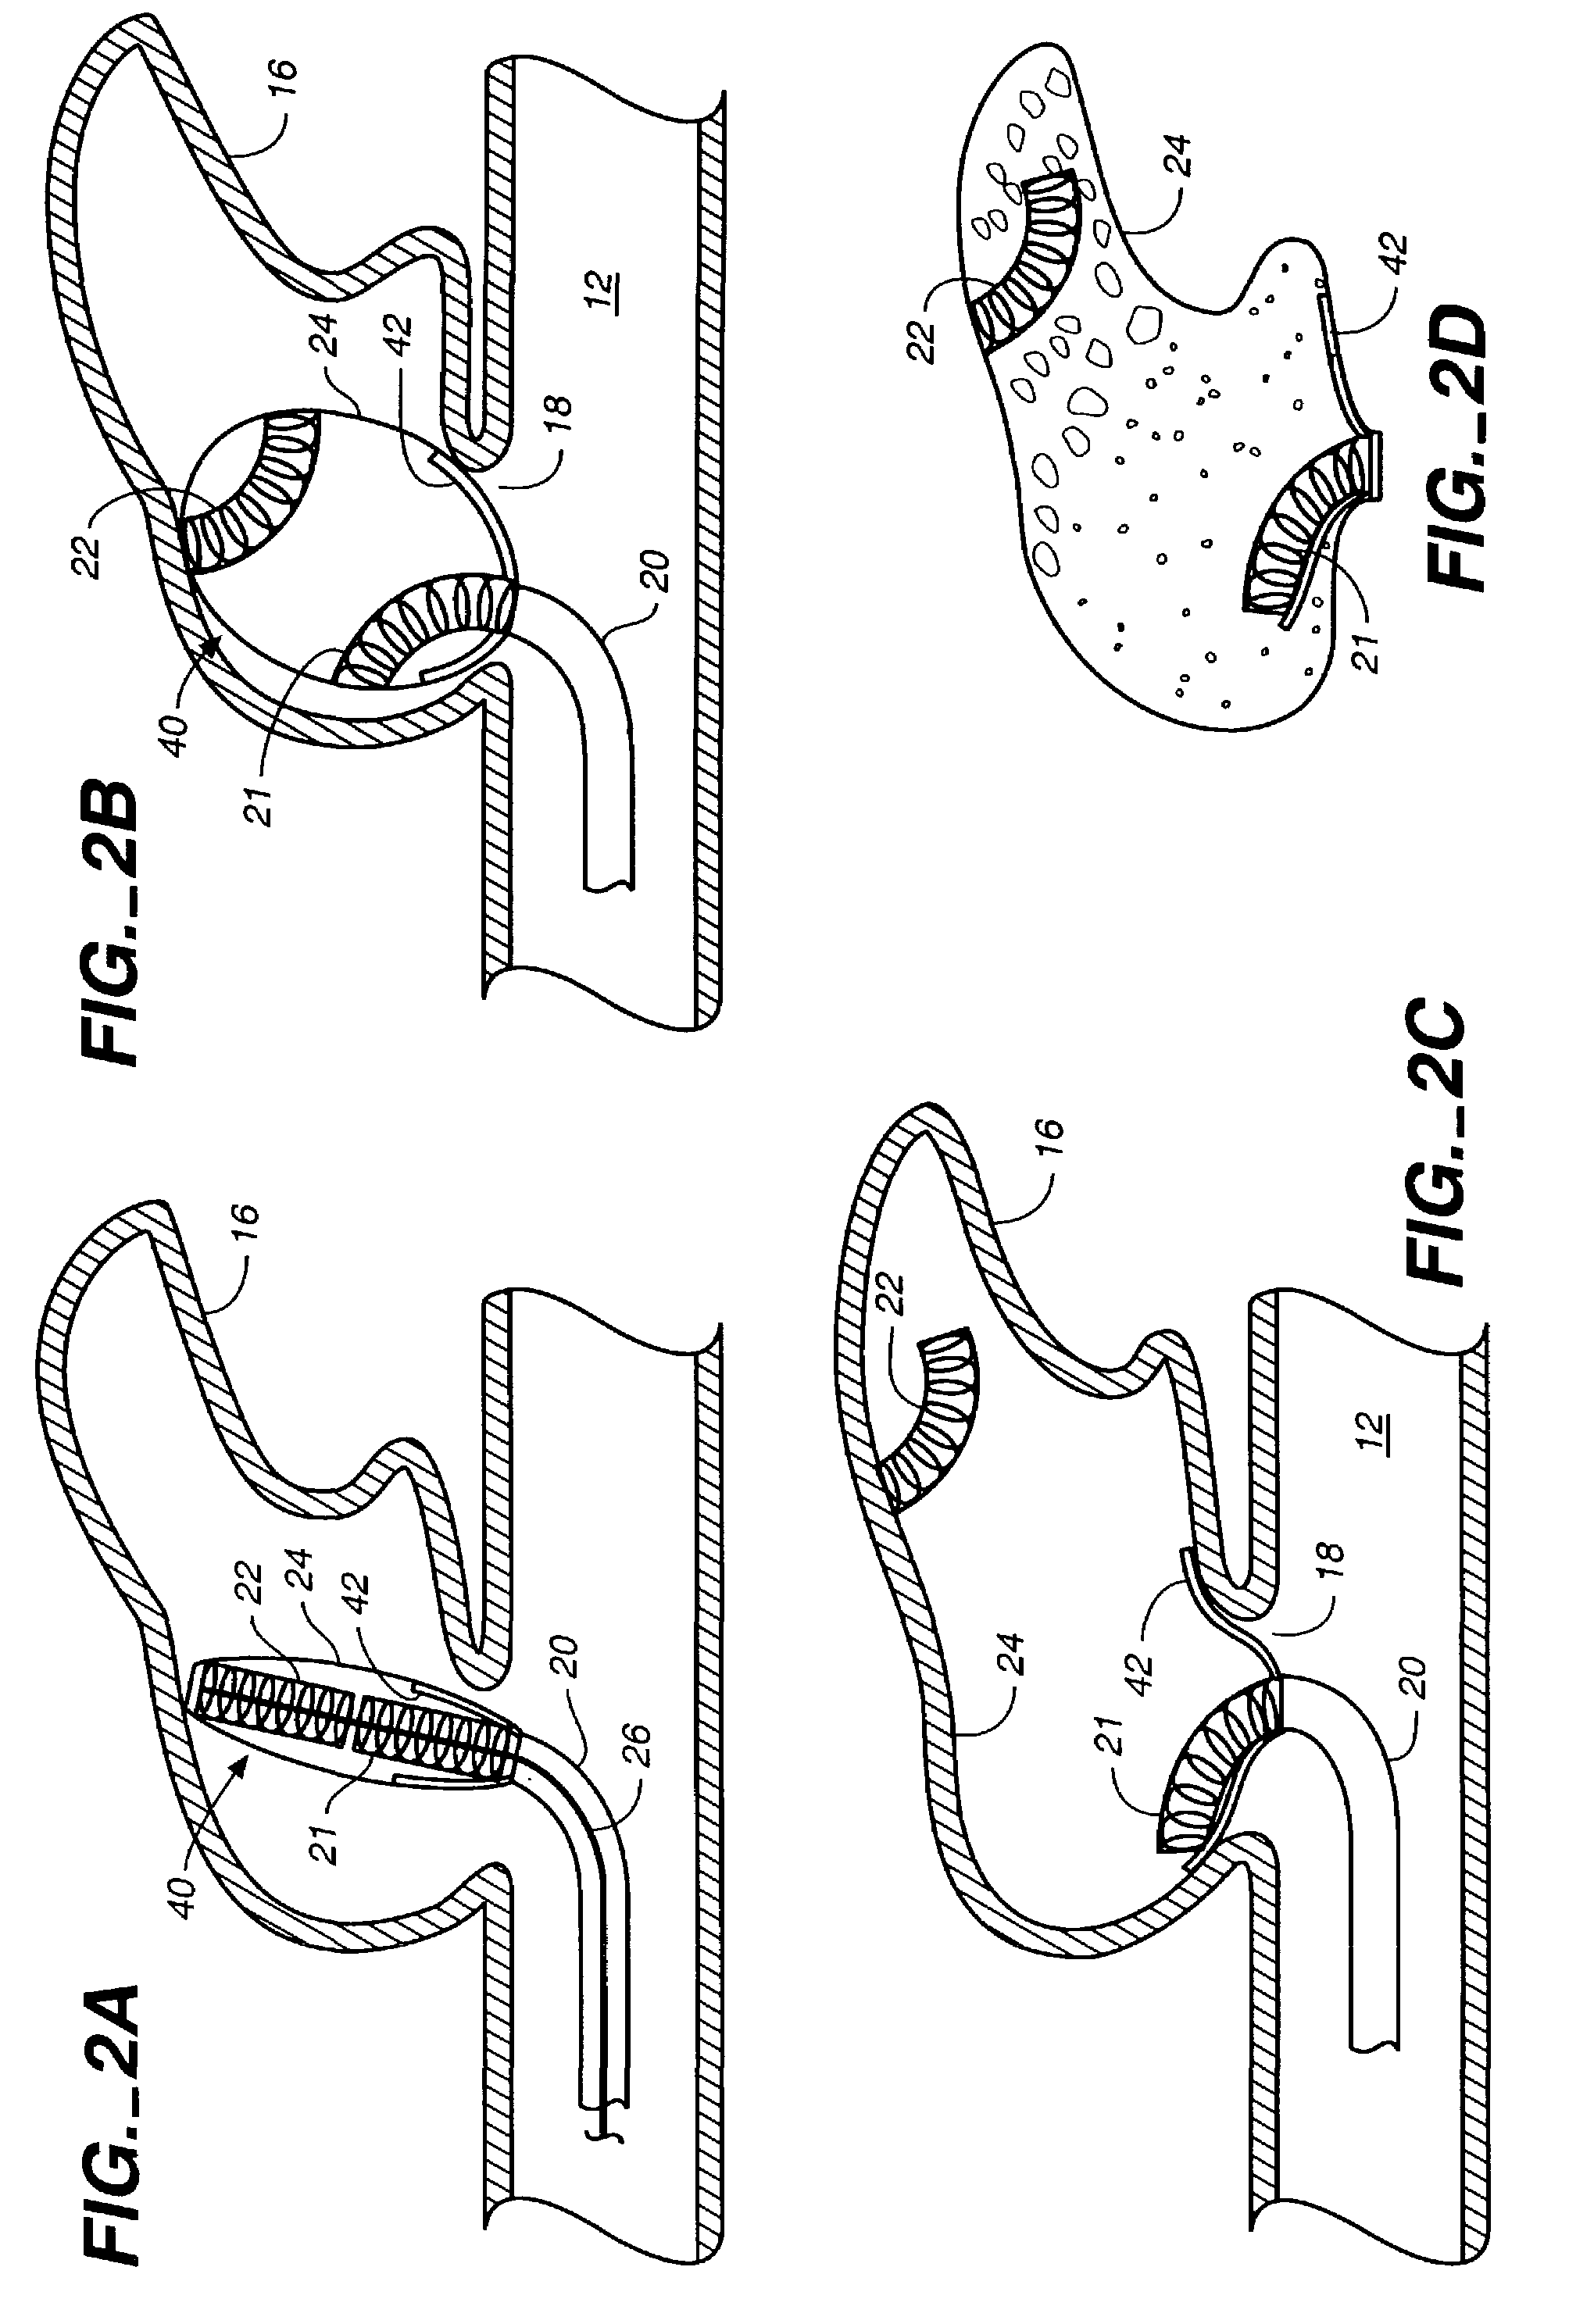 Expandable body cavity liner device